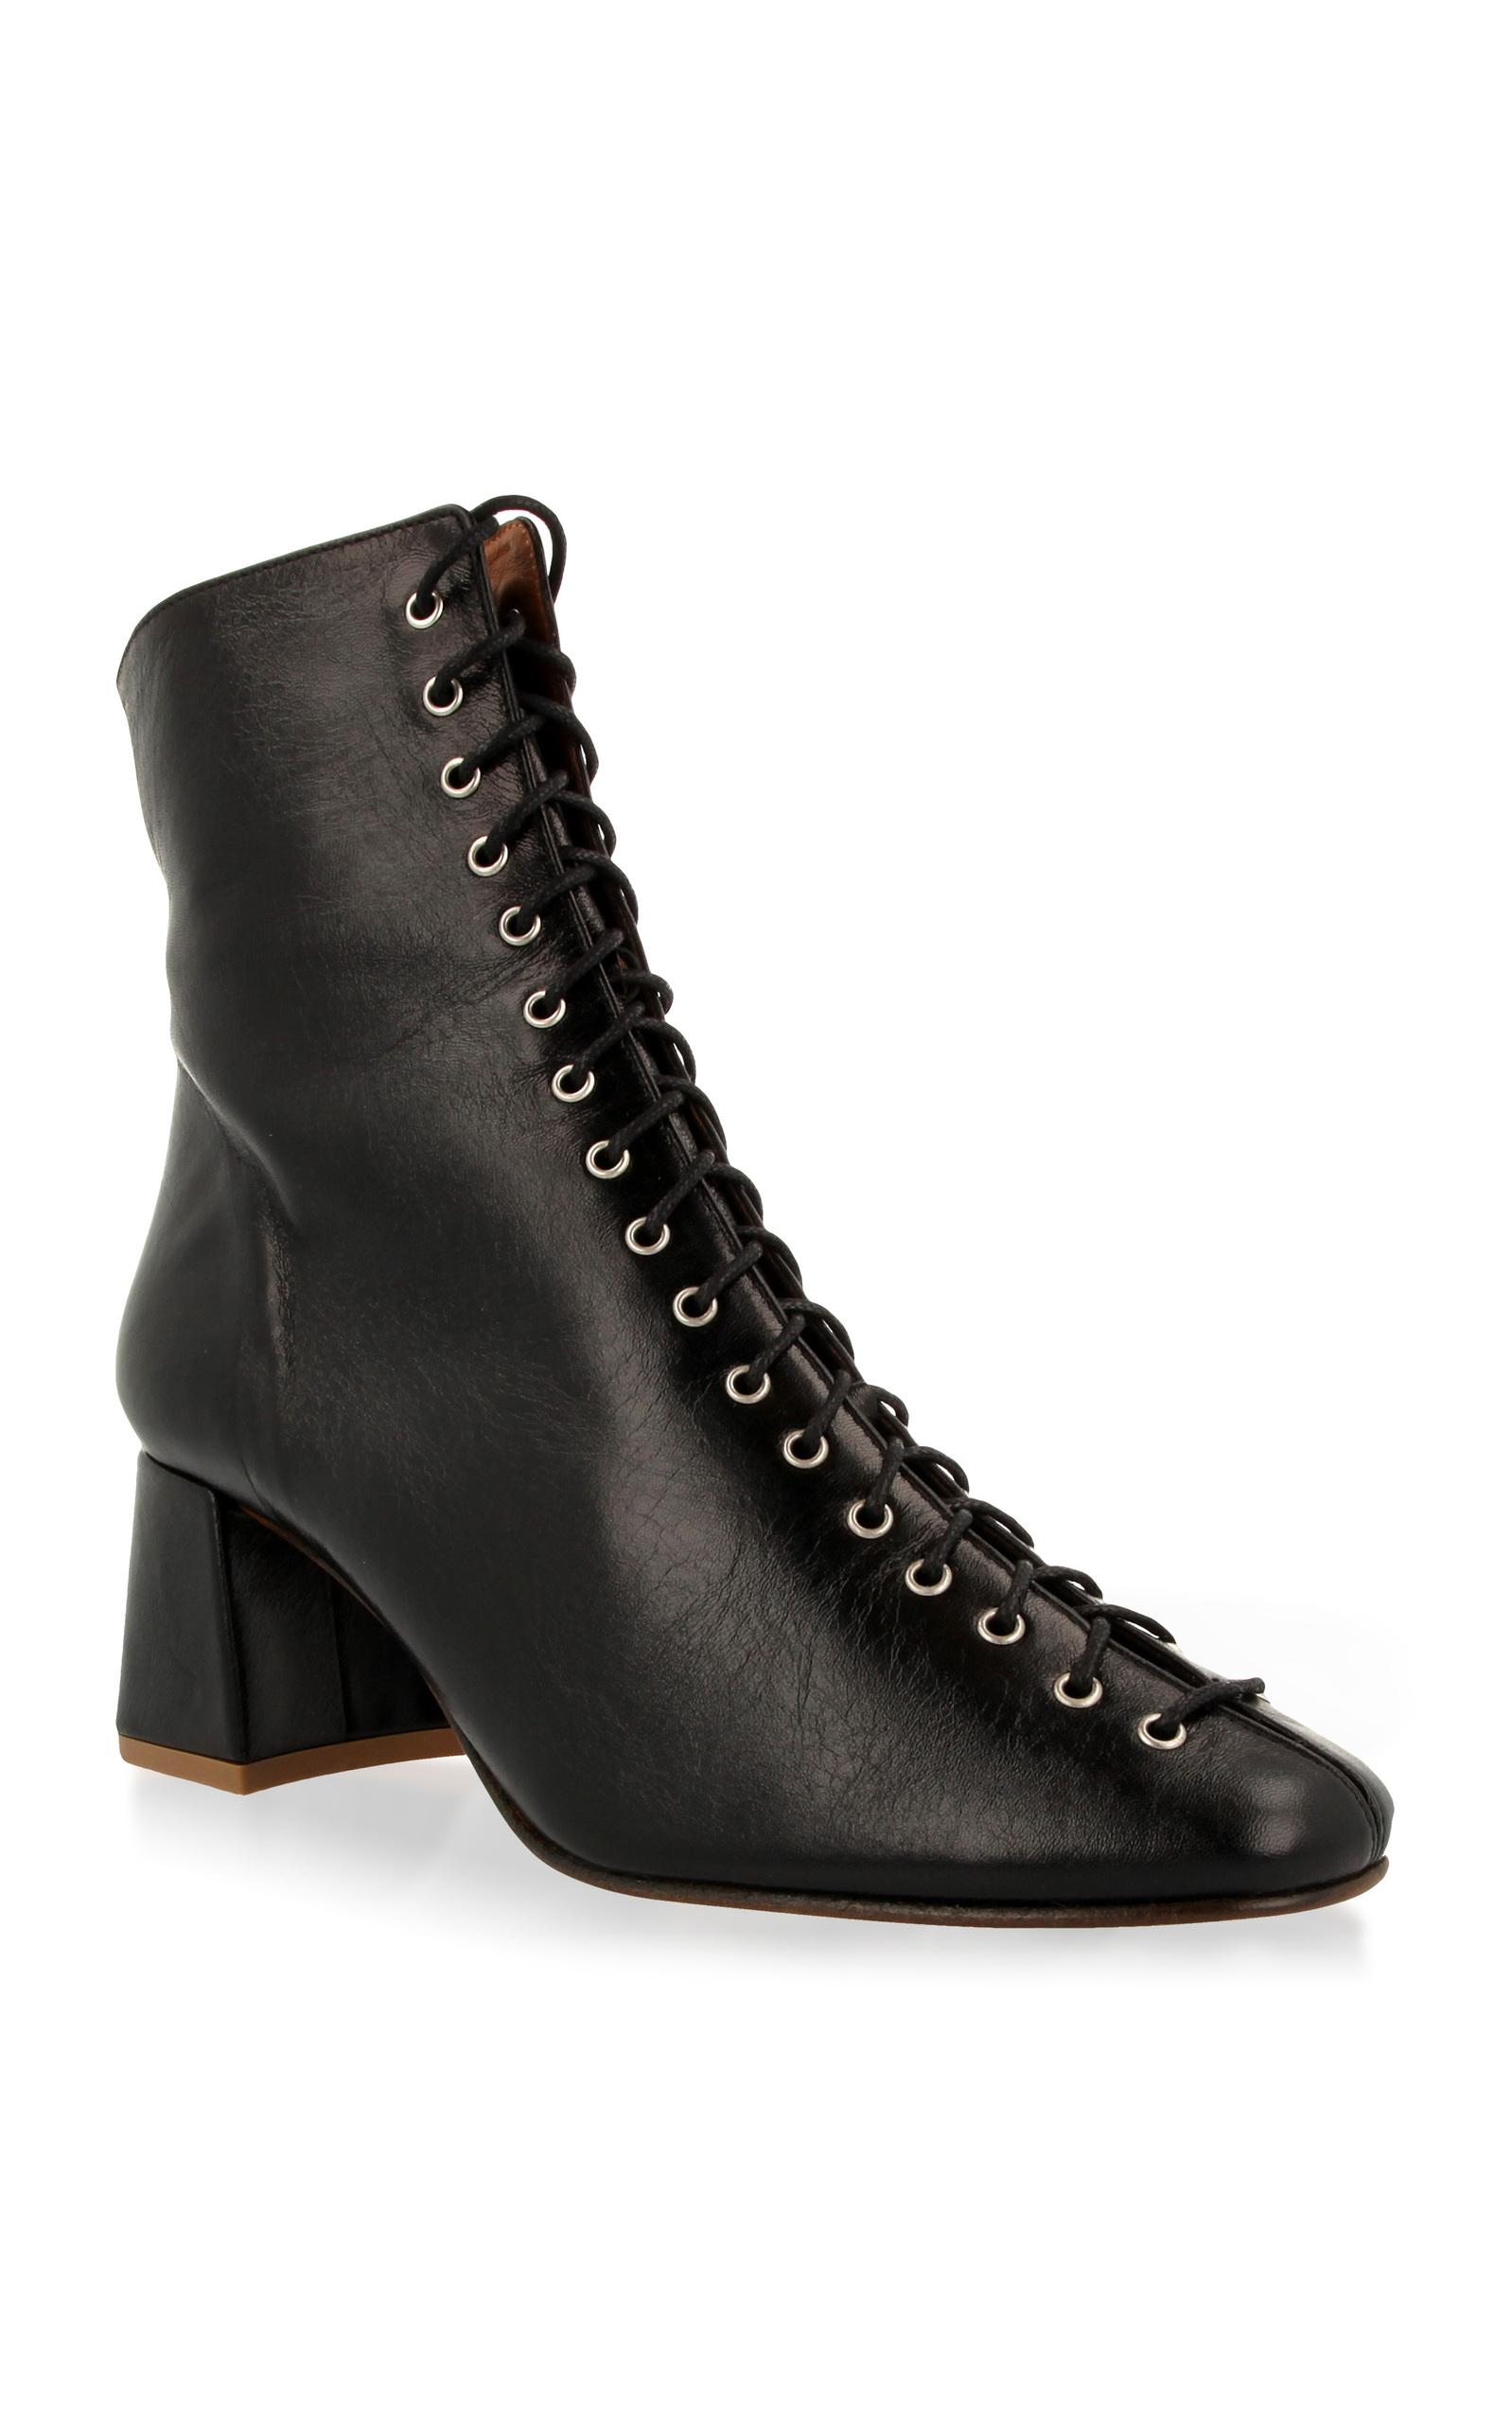 Lyst - By Far Becca Lace Up Leather Boot in Black1598 x 2560